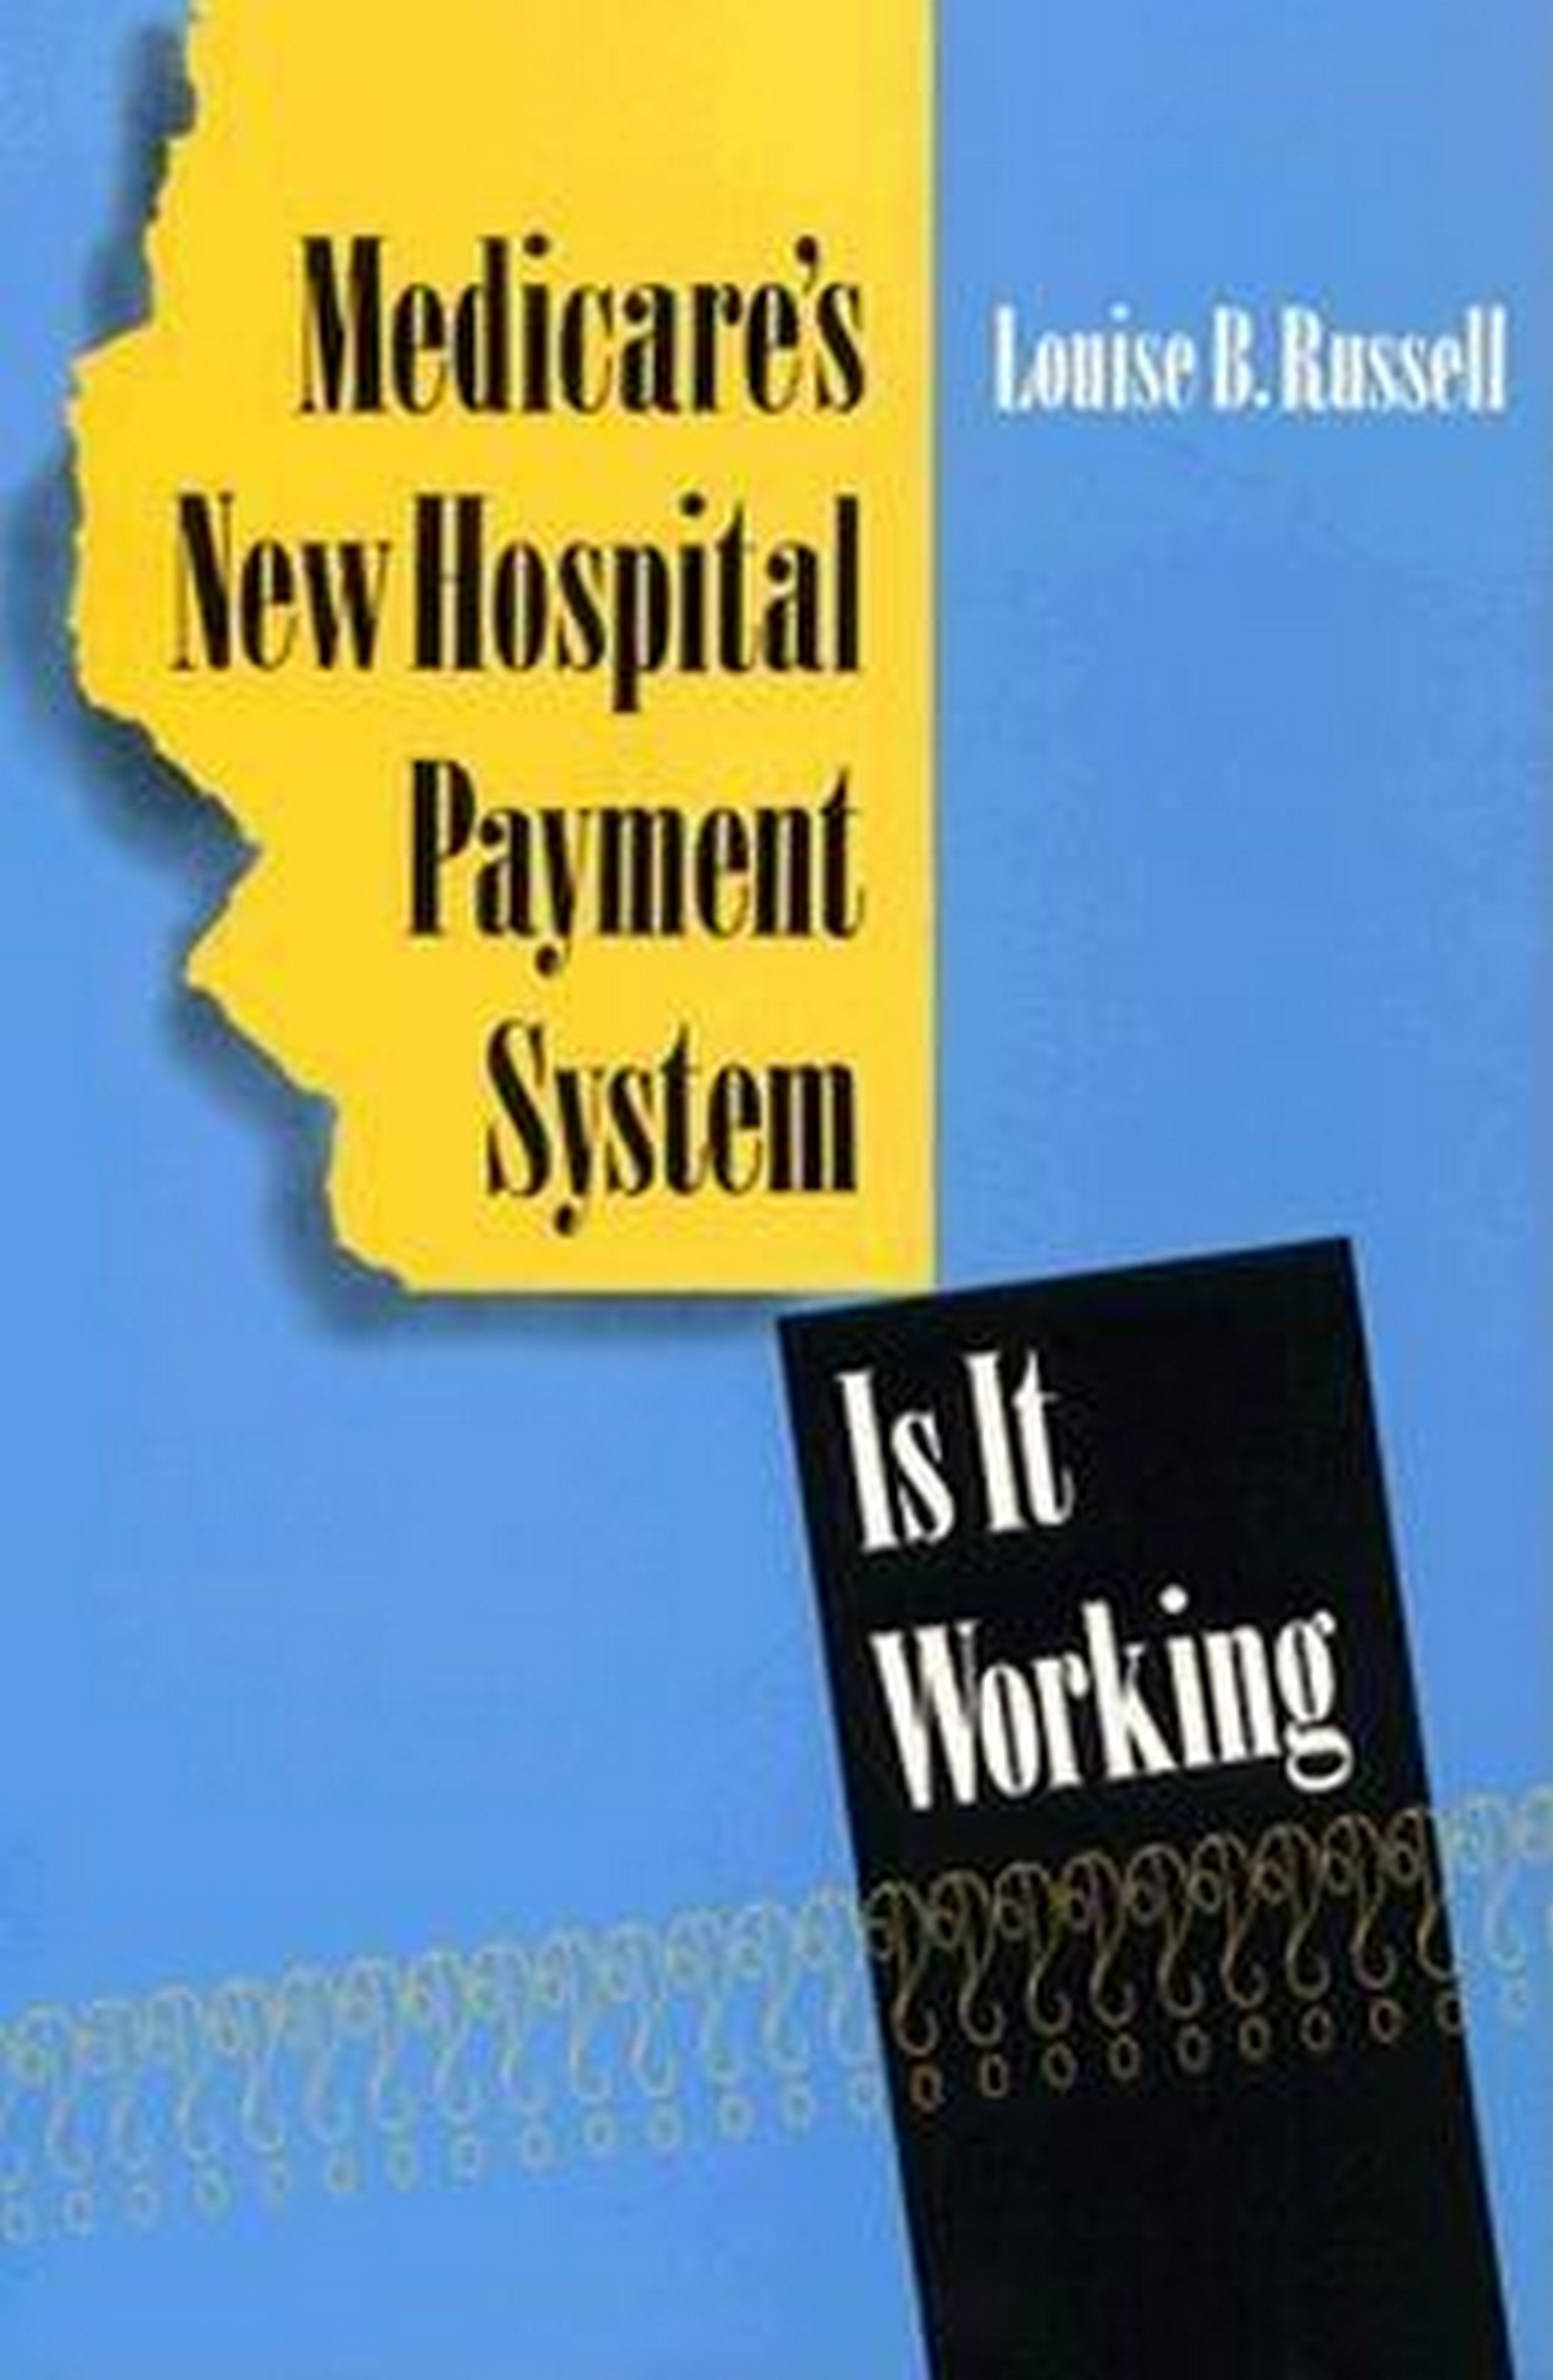 Medicare's New Hospital Payment System: Is It Working?